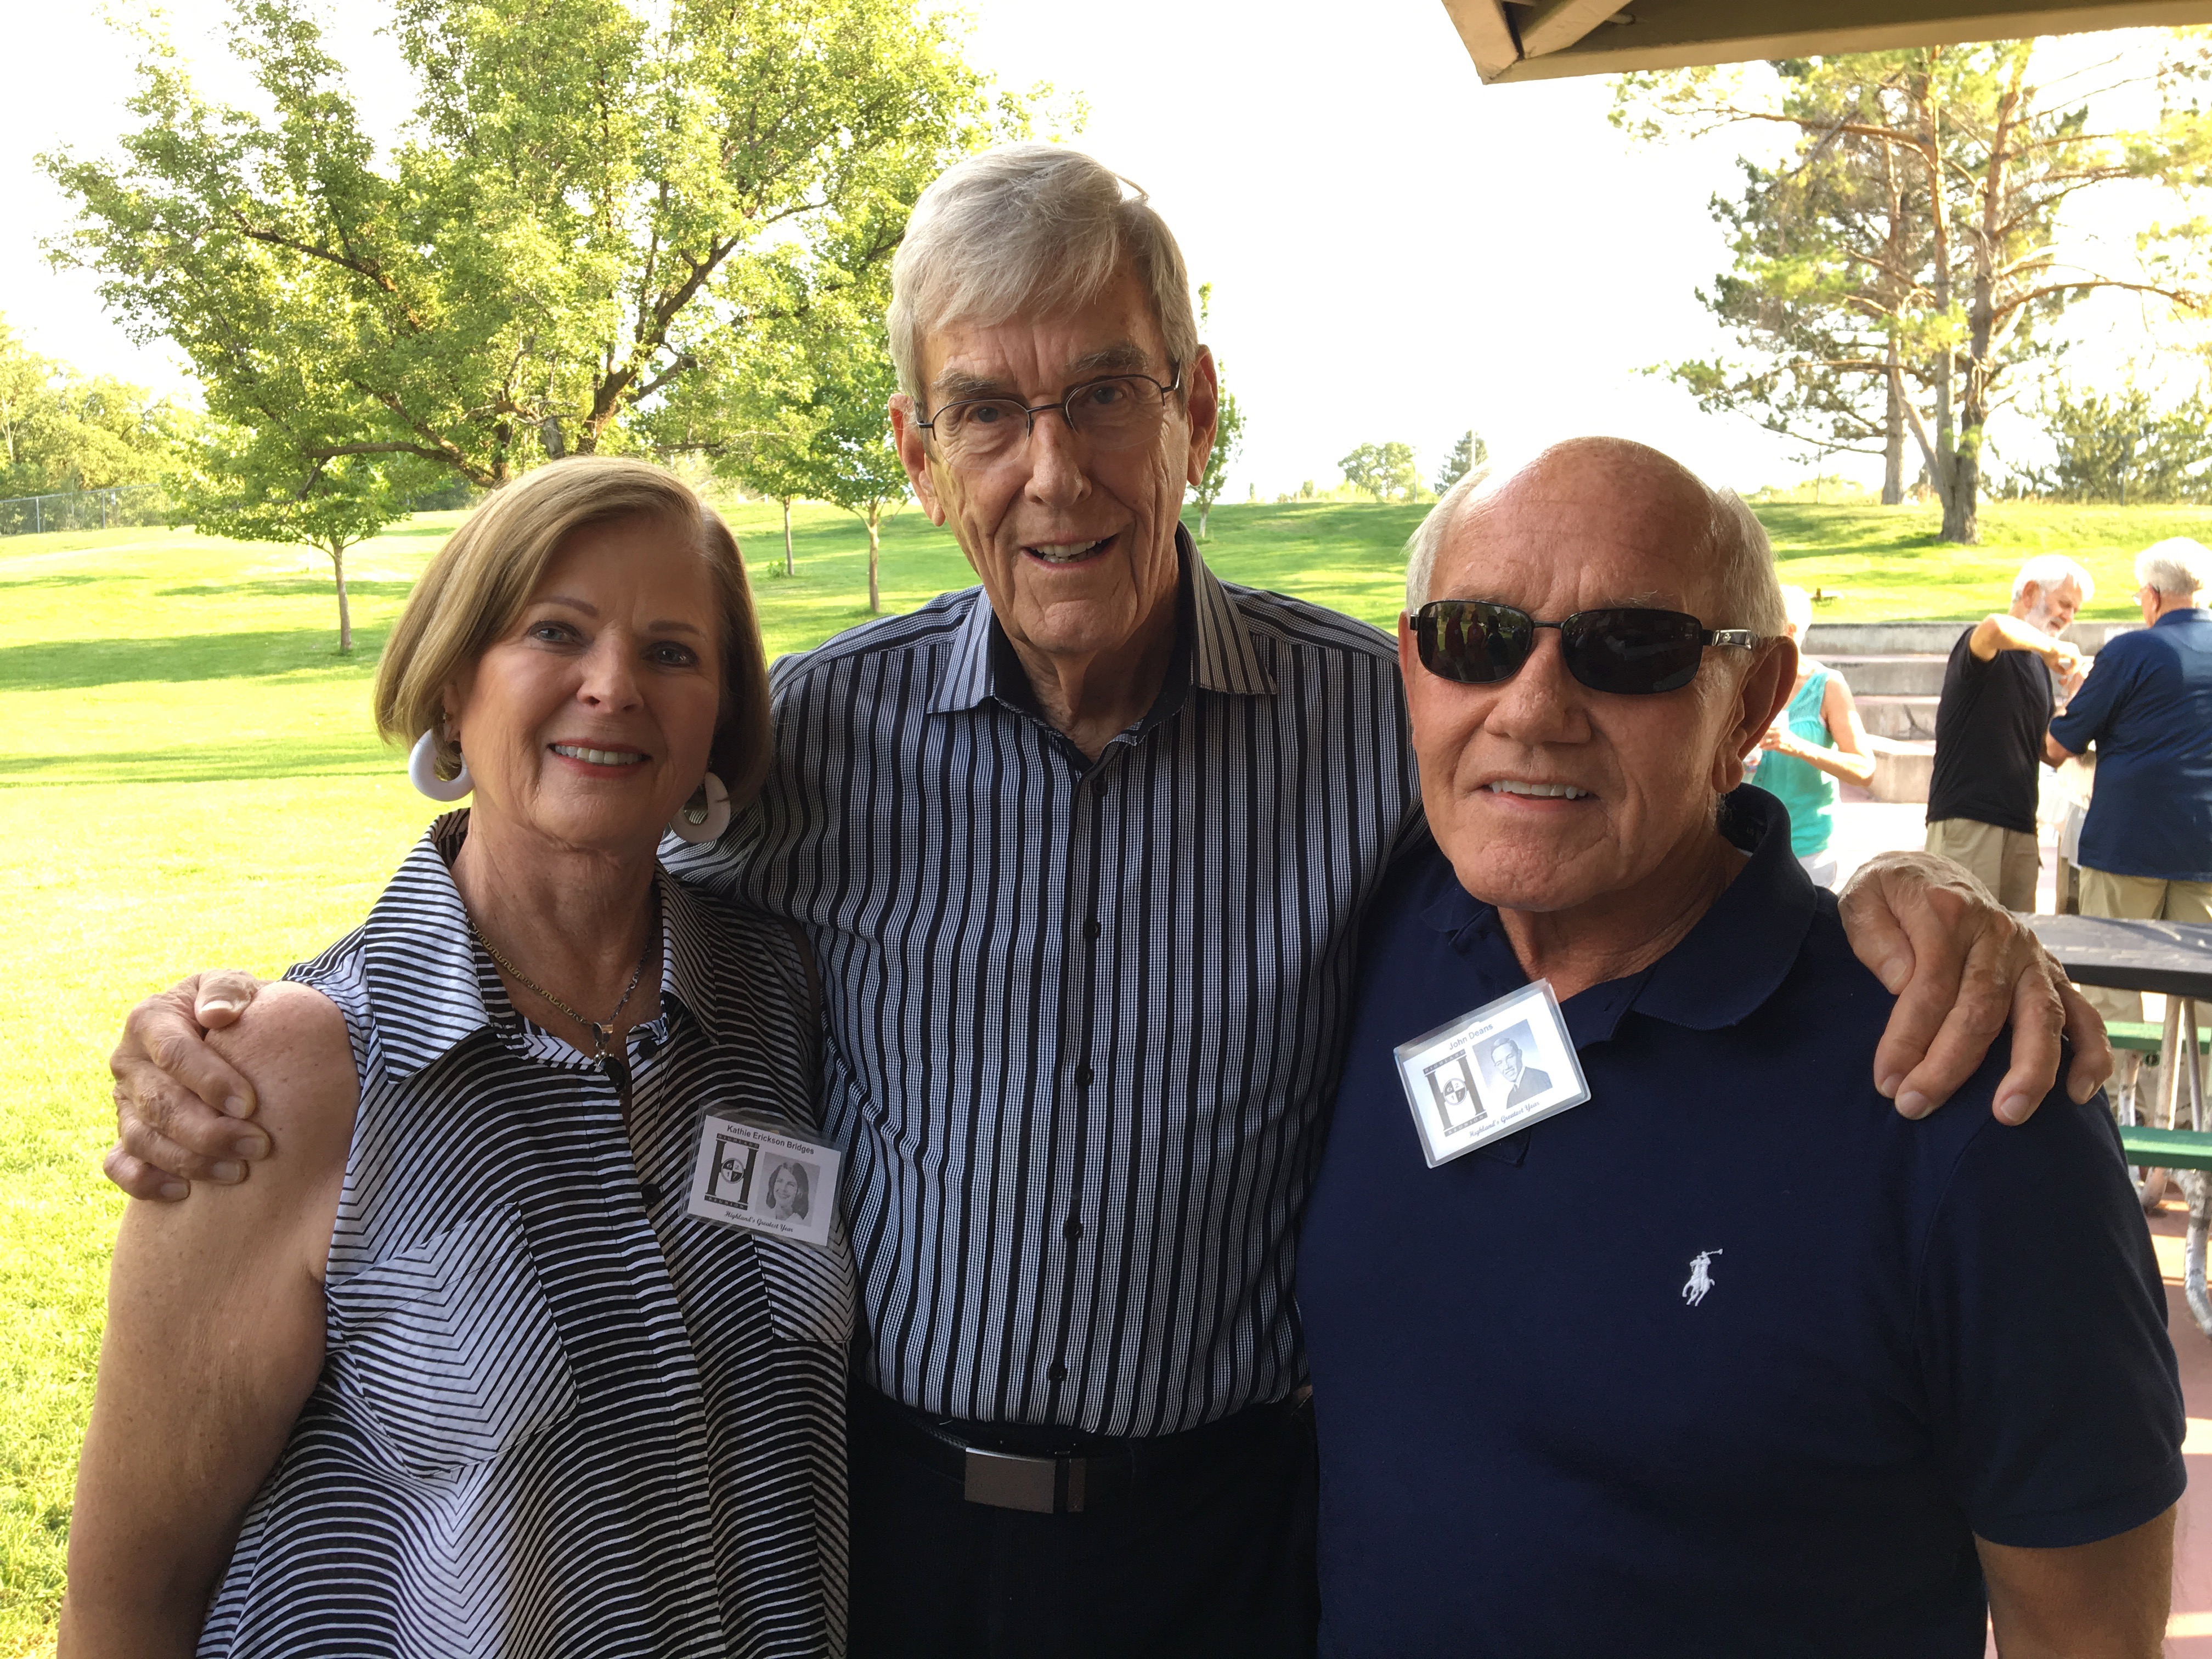 55th Reunion - See more pictures in the 